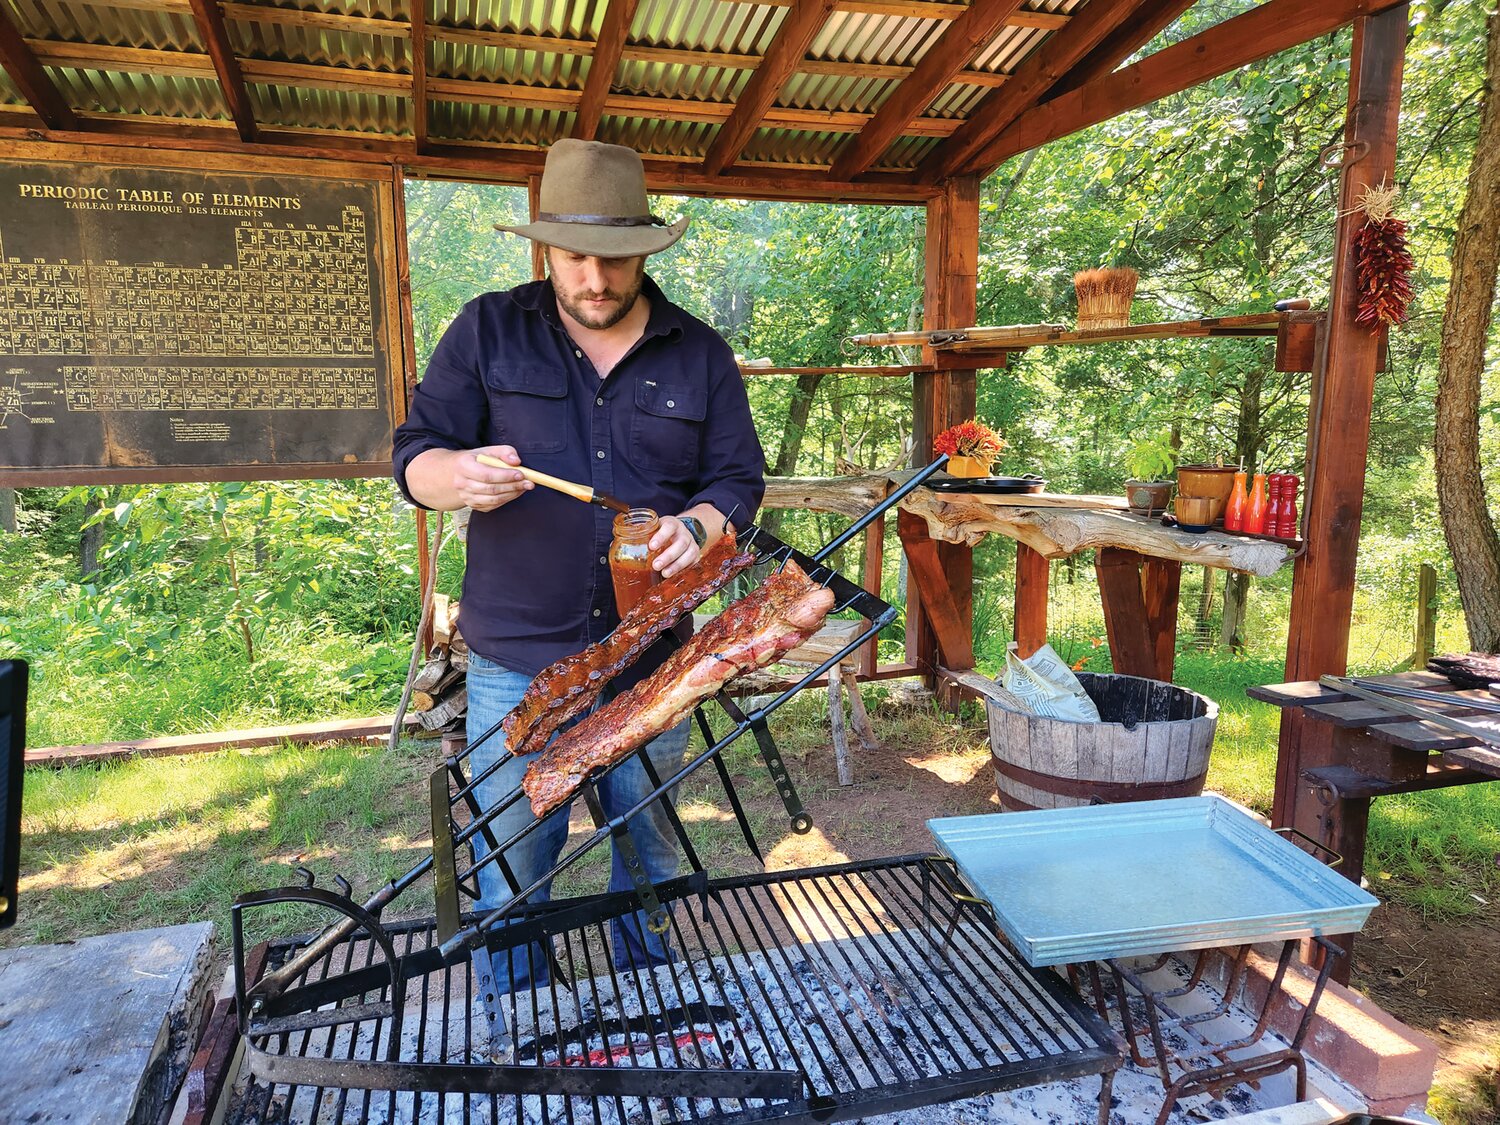 Thor Giese applies barbecue sauce to a rack of ribs cooking over the coals.